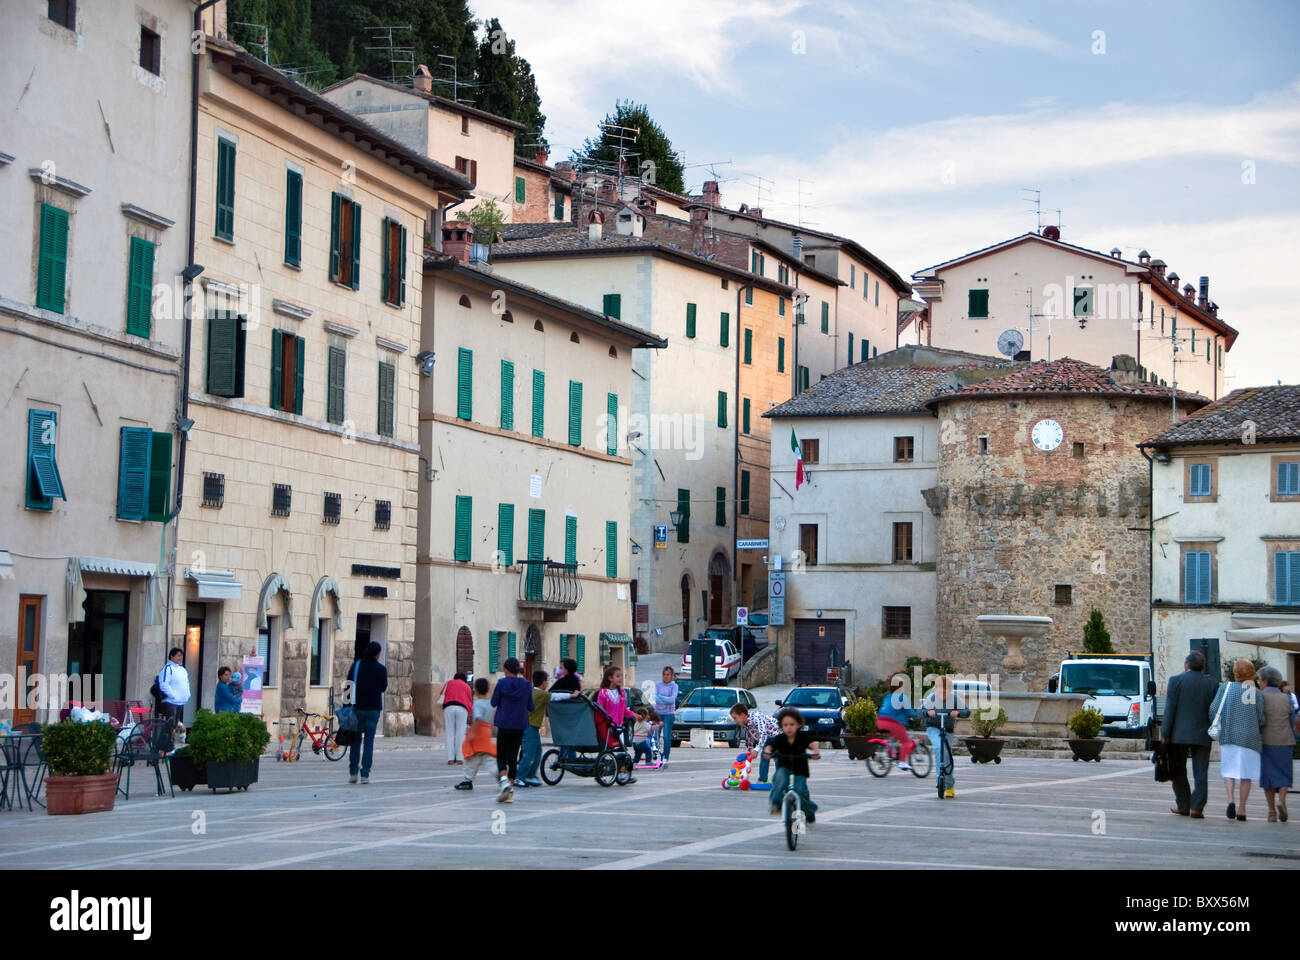 Evening in the Piazza in Tuscany Stock Photo